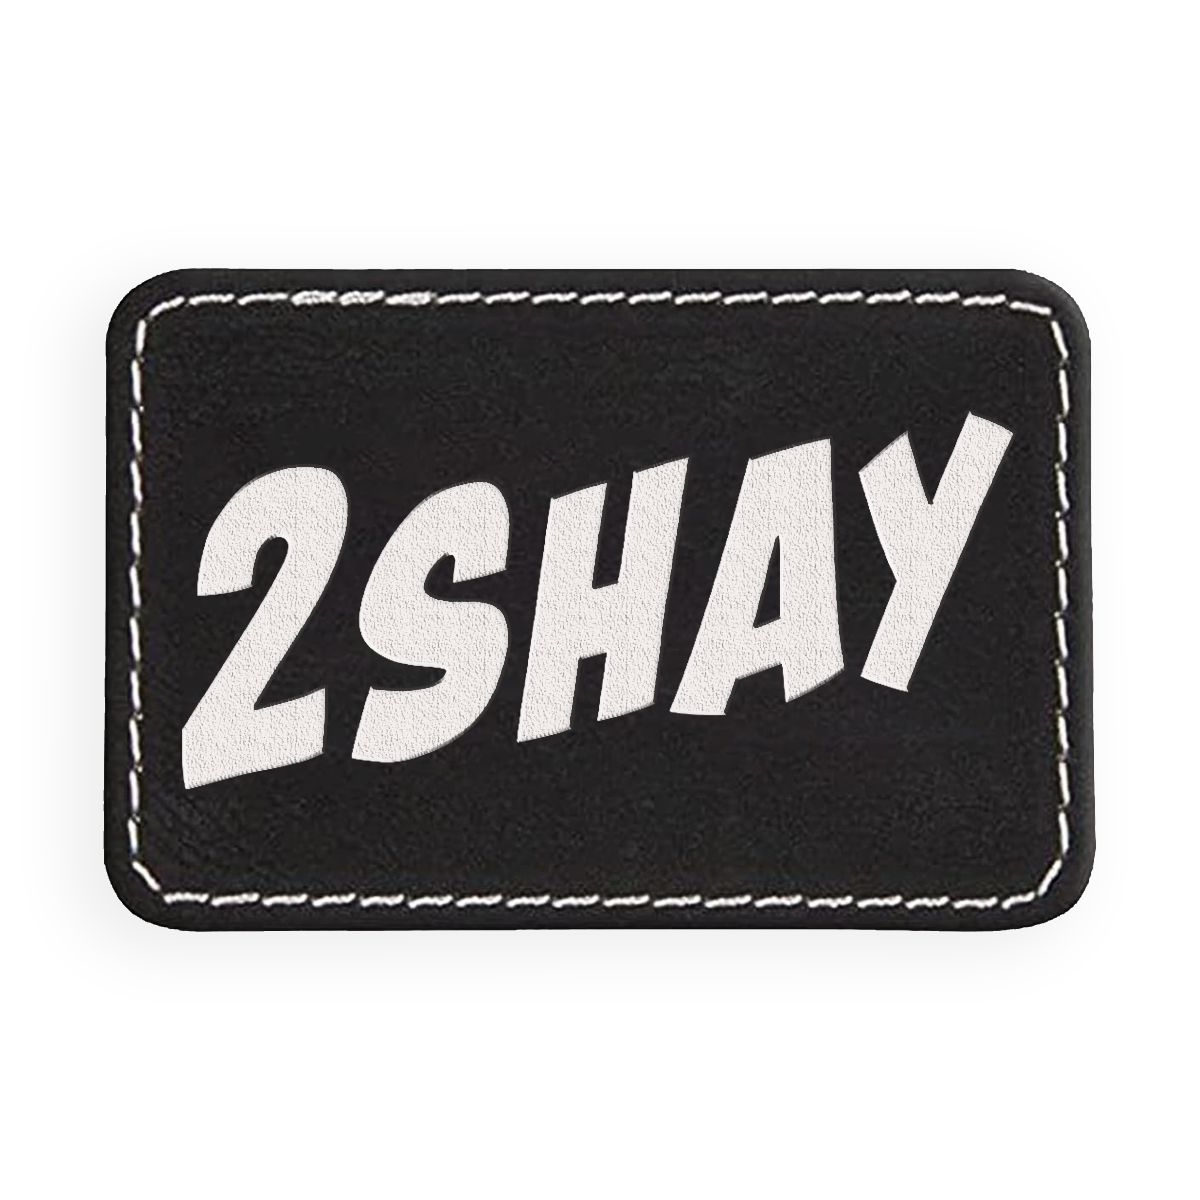 2Shay Engraved Patch